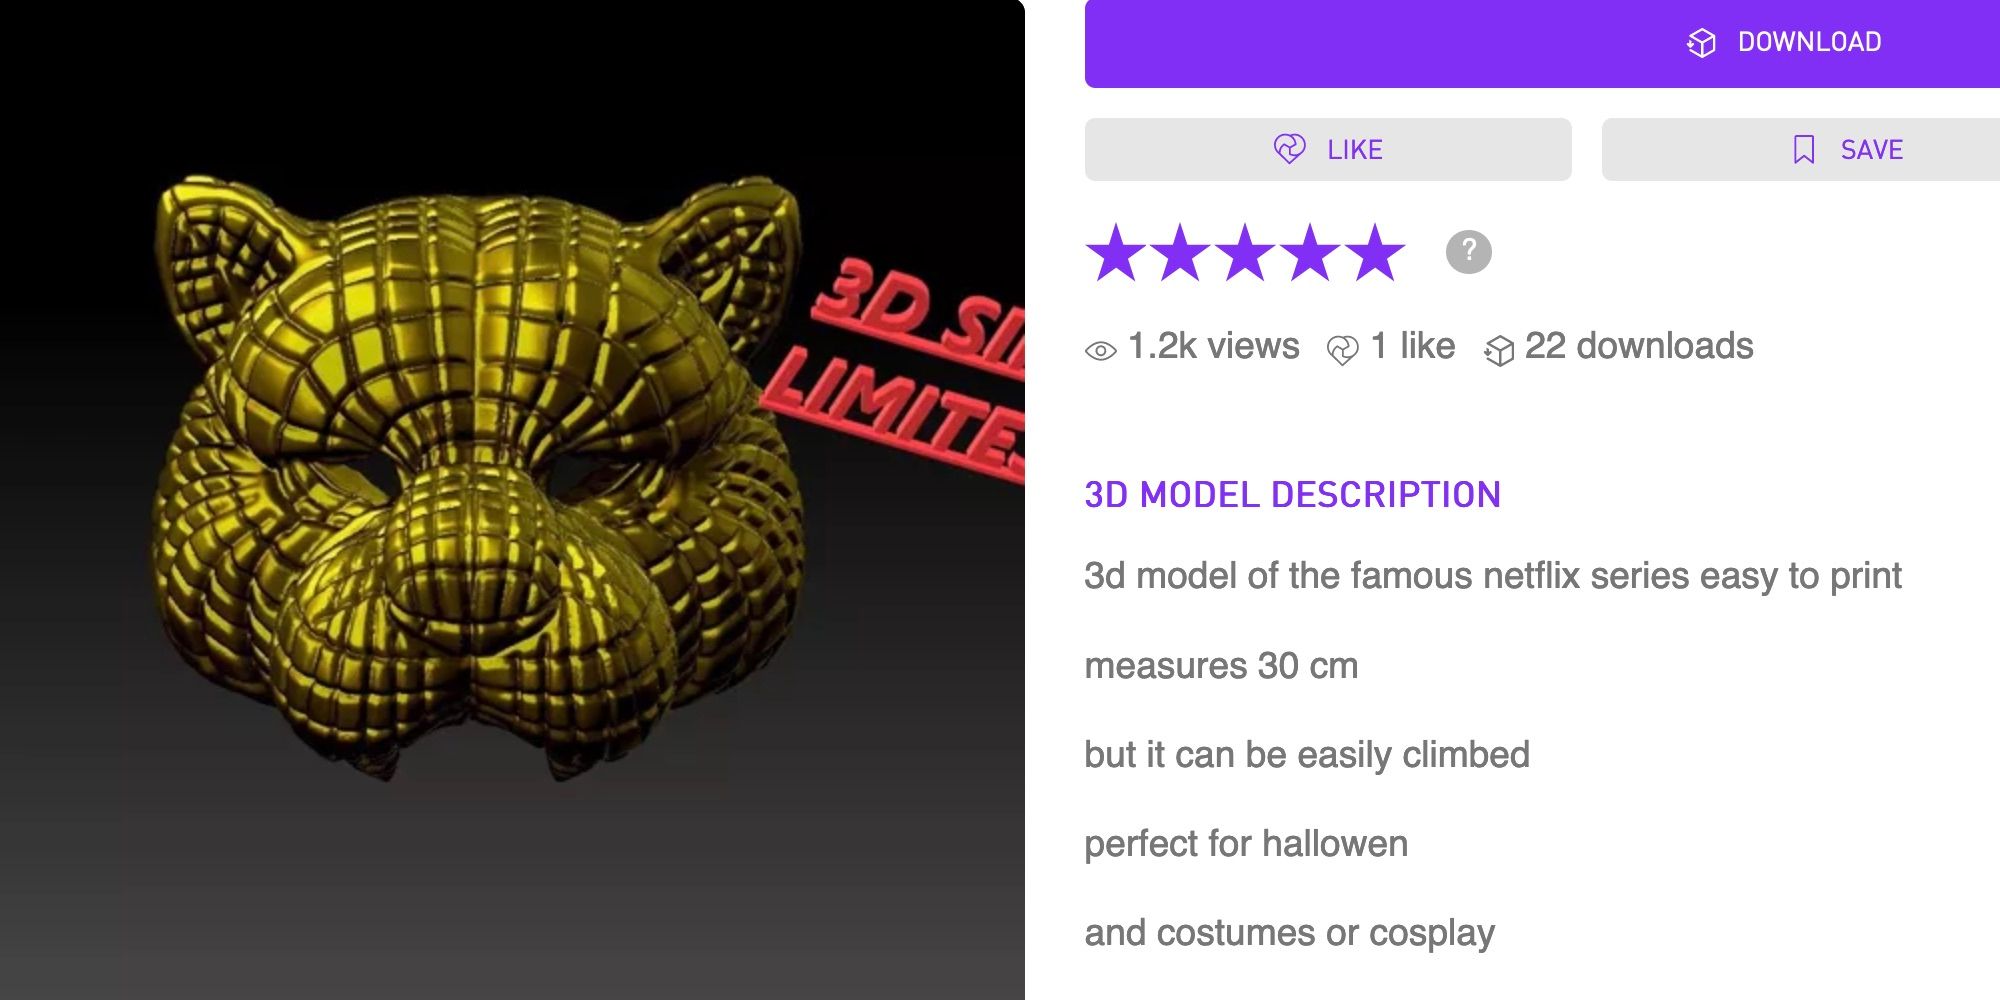 A 3D model of a golden tiger mask on a black background, next to information about the designer